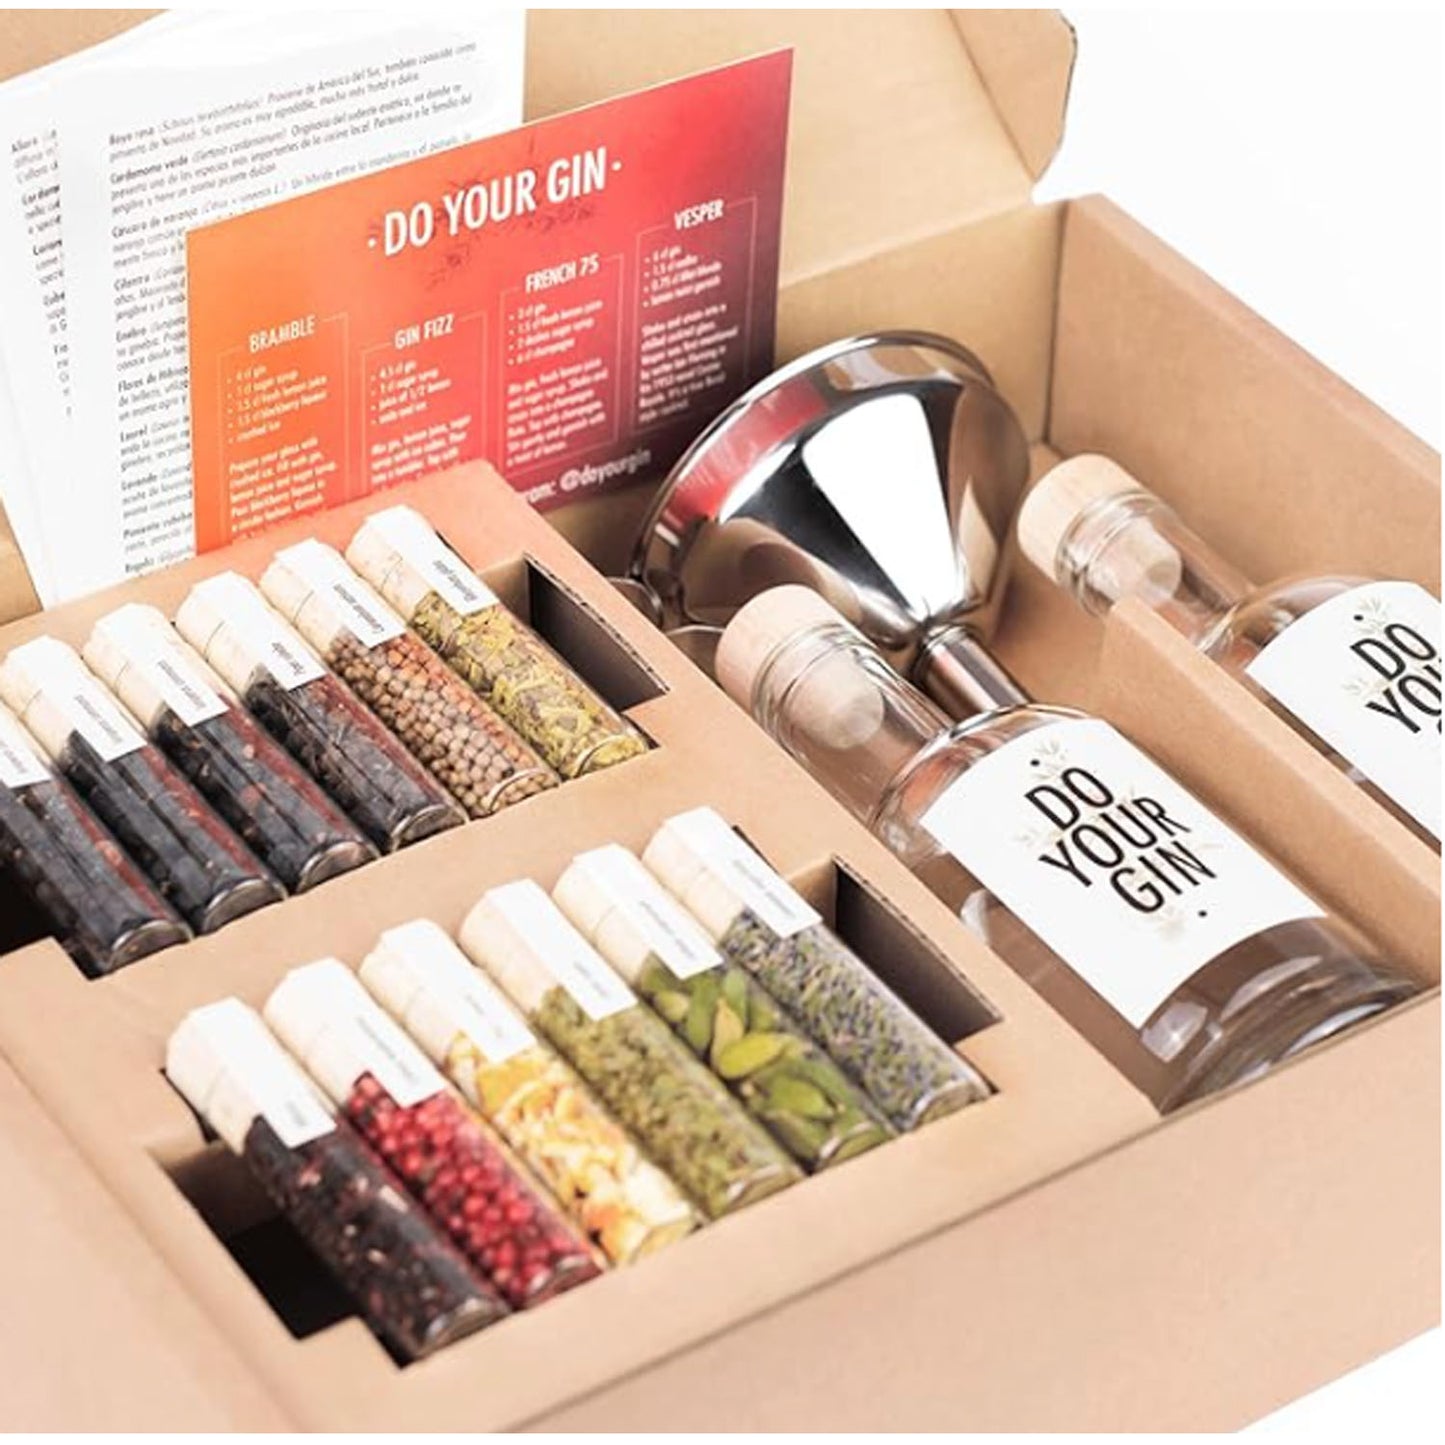 DO YOUR OWN GIN - DIY GIN MAKING INFUSION KIT